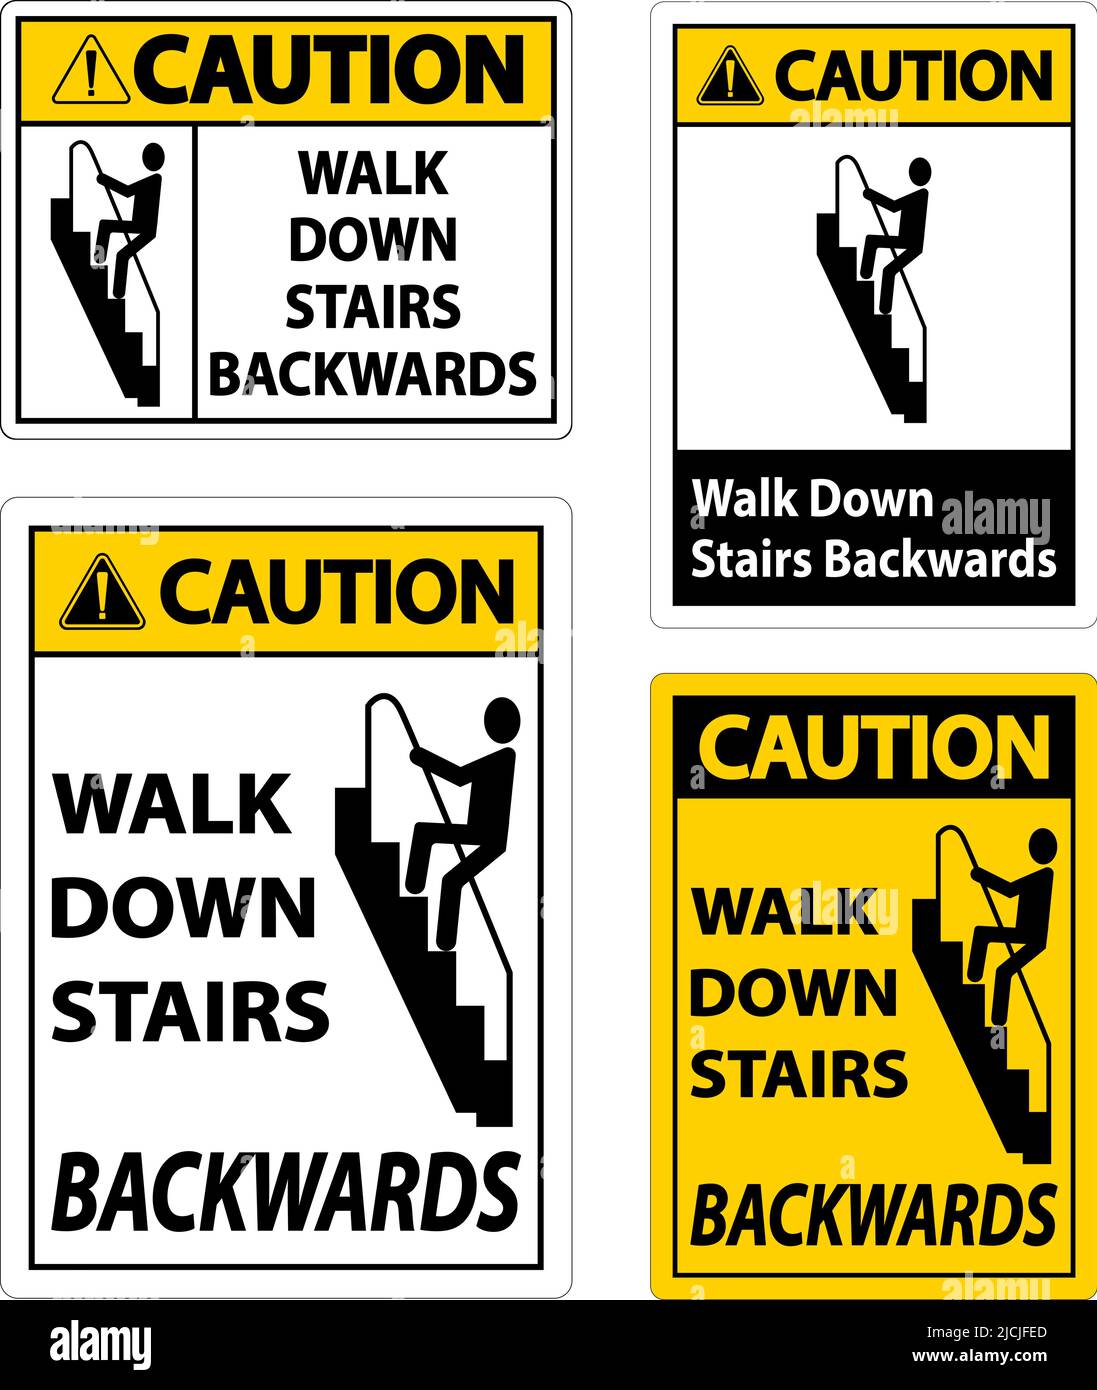 Caution Walk Down Stairs Backwards Sign Stock Vector Image & Art - Alamy